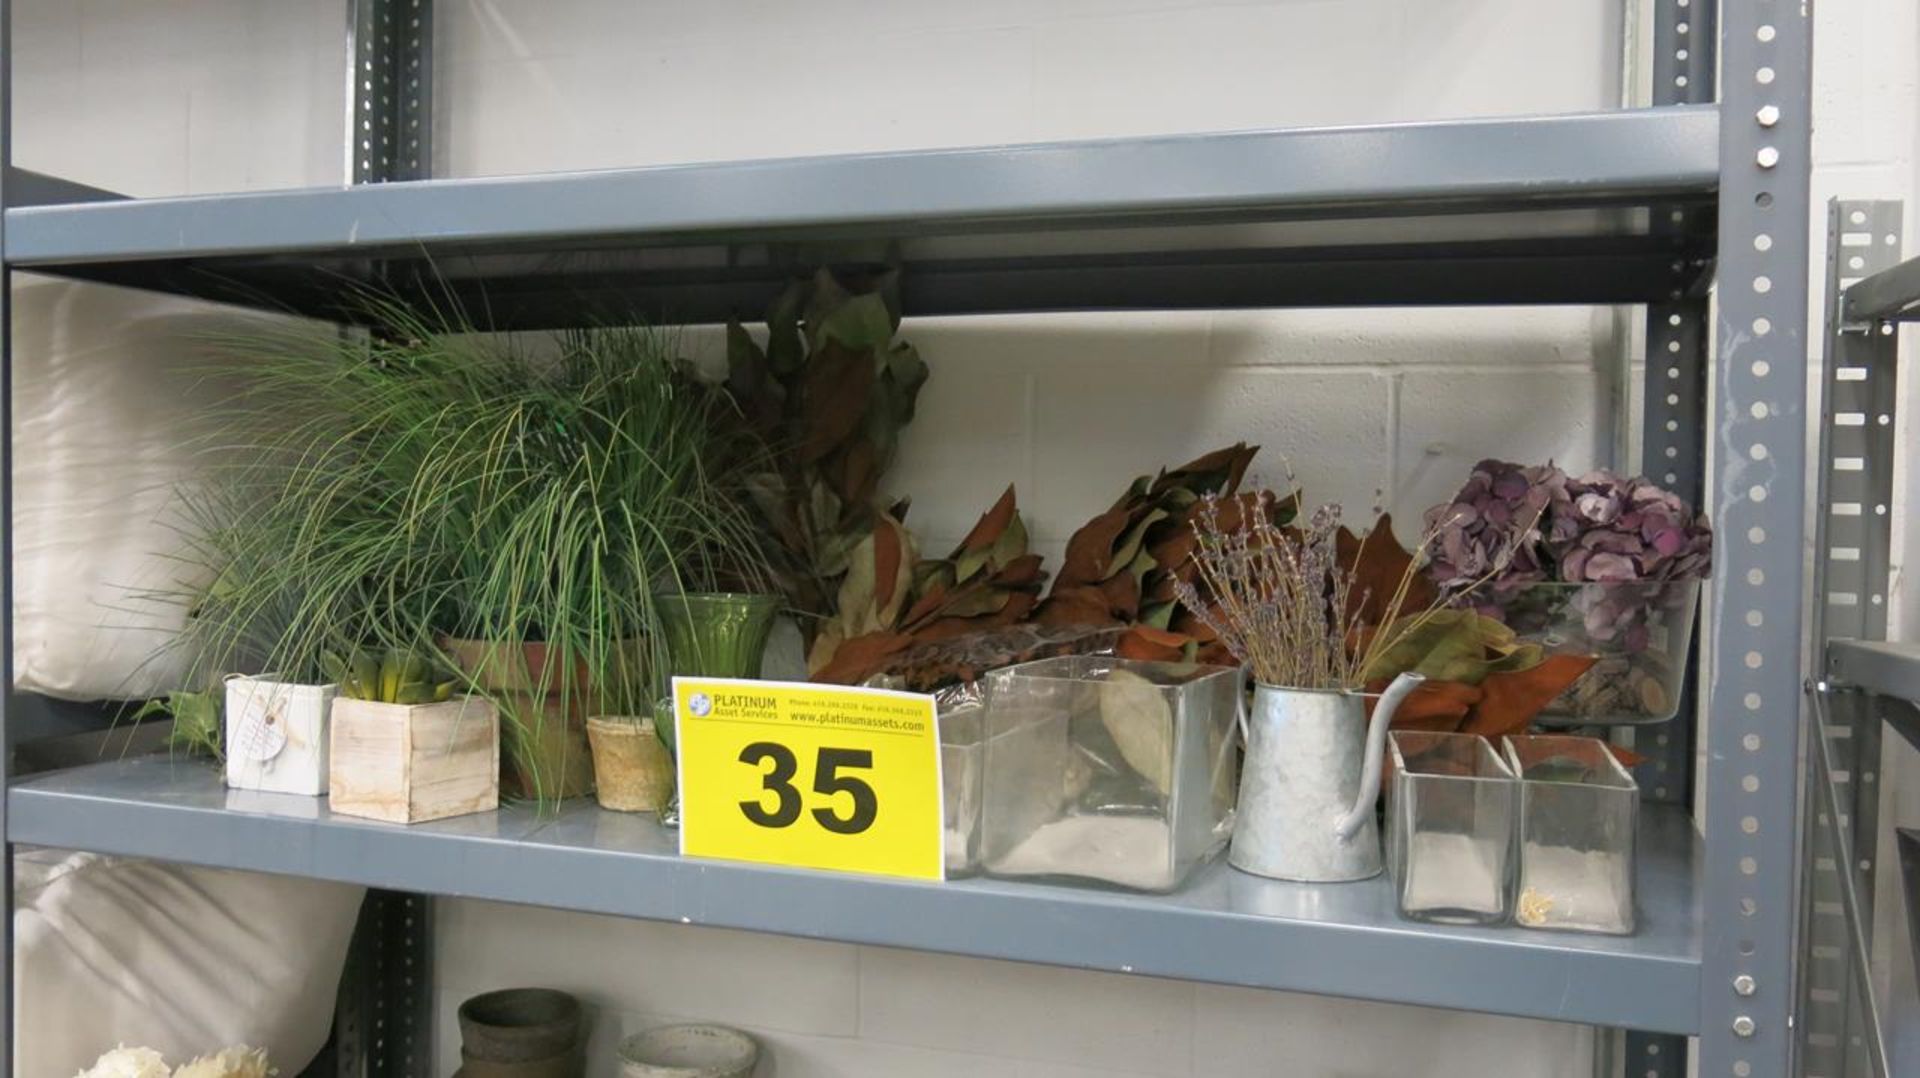 LOT OF FAKE PLANTS AND VASES - Image 2 of 2